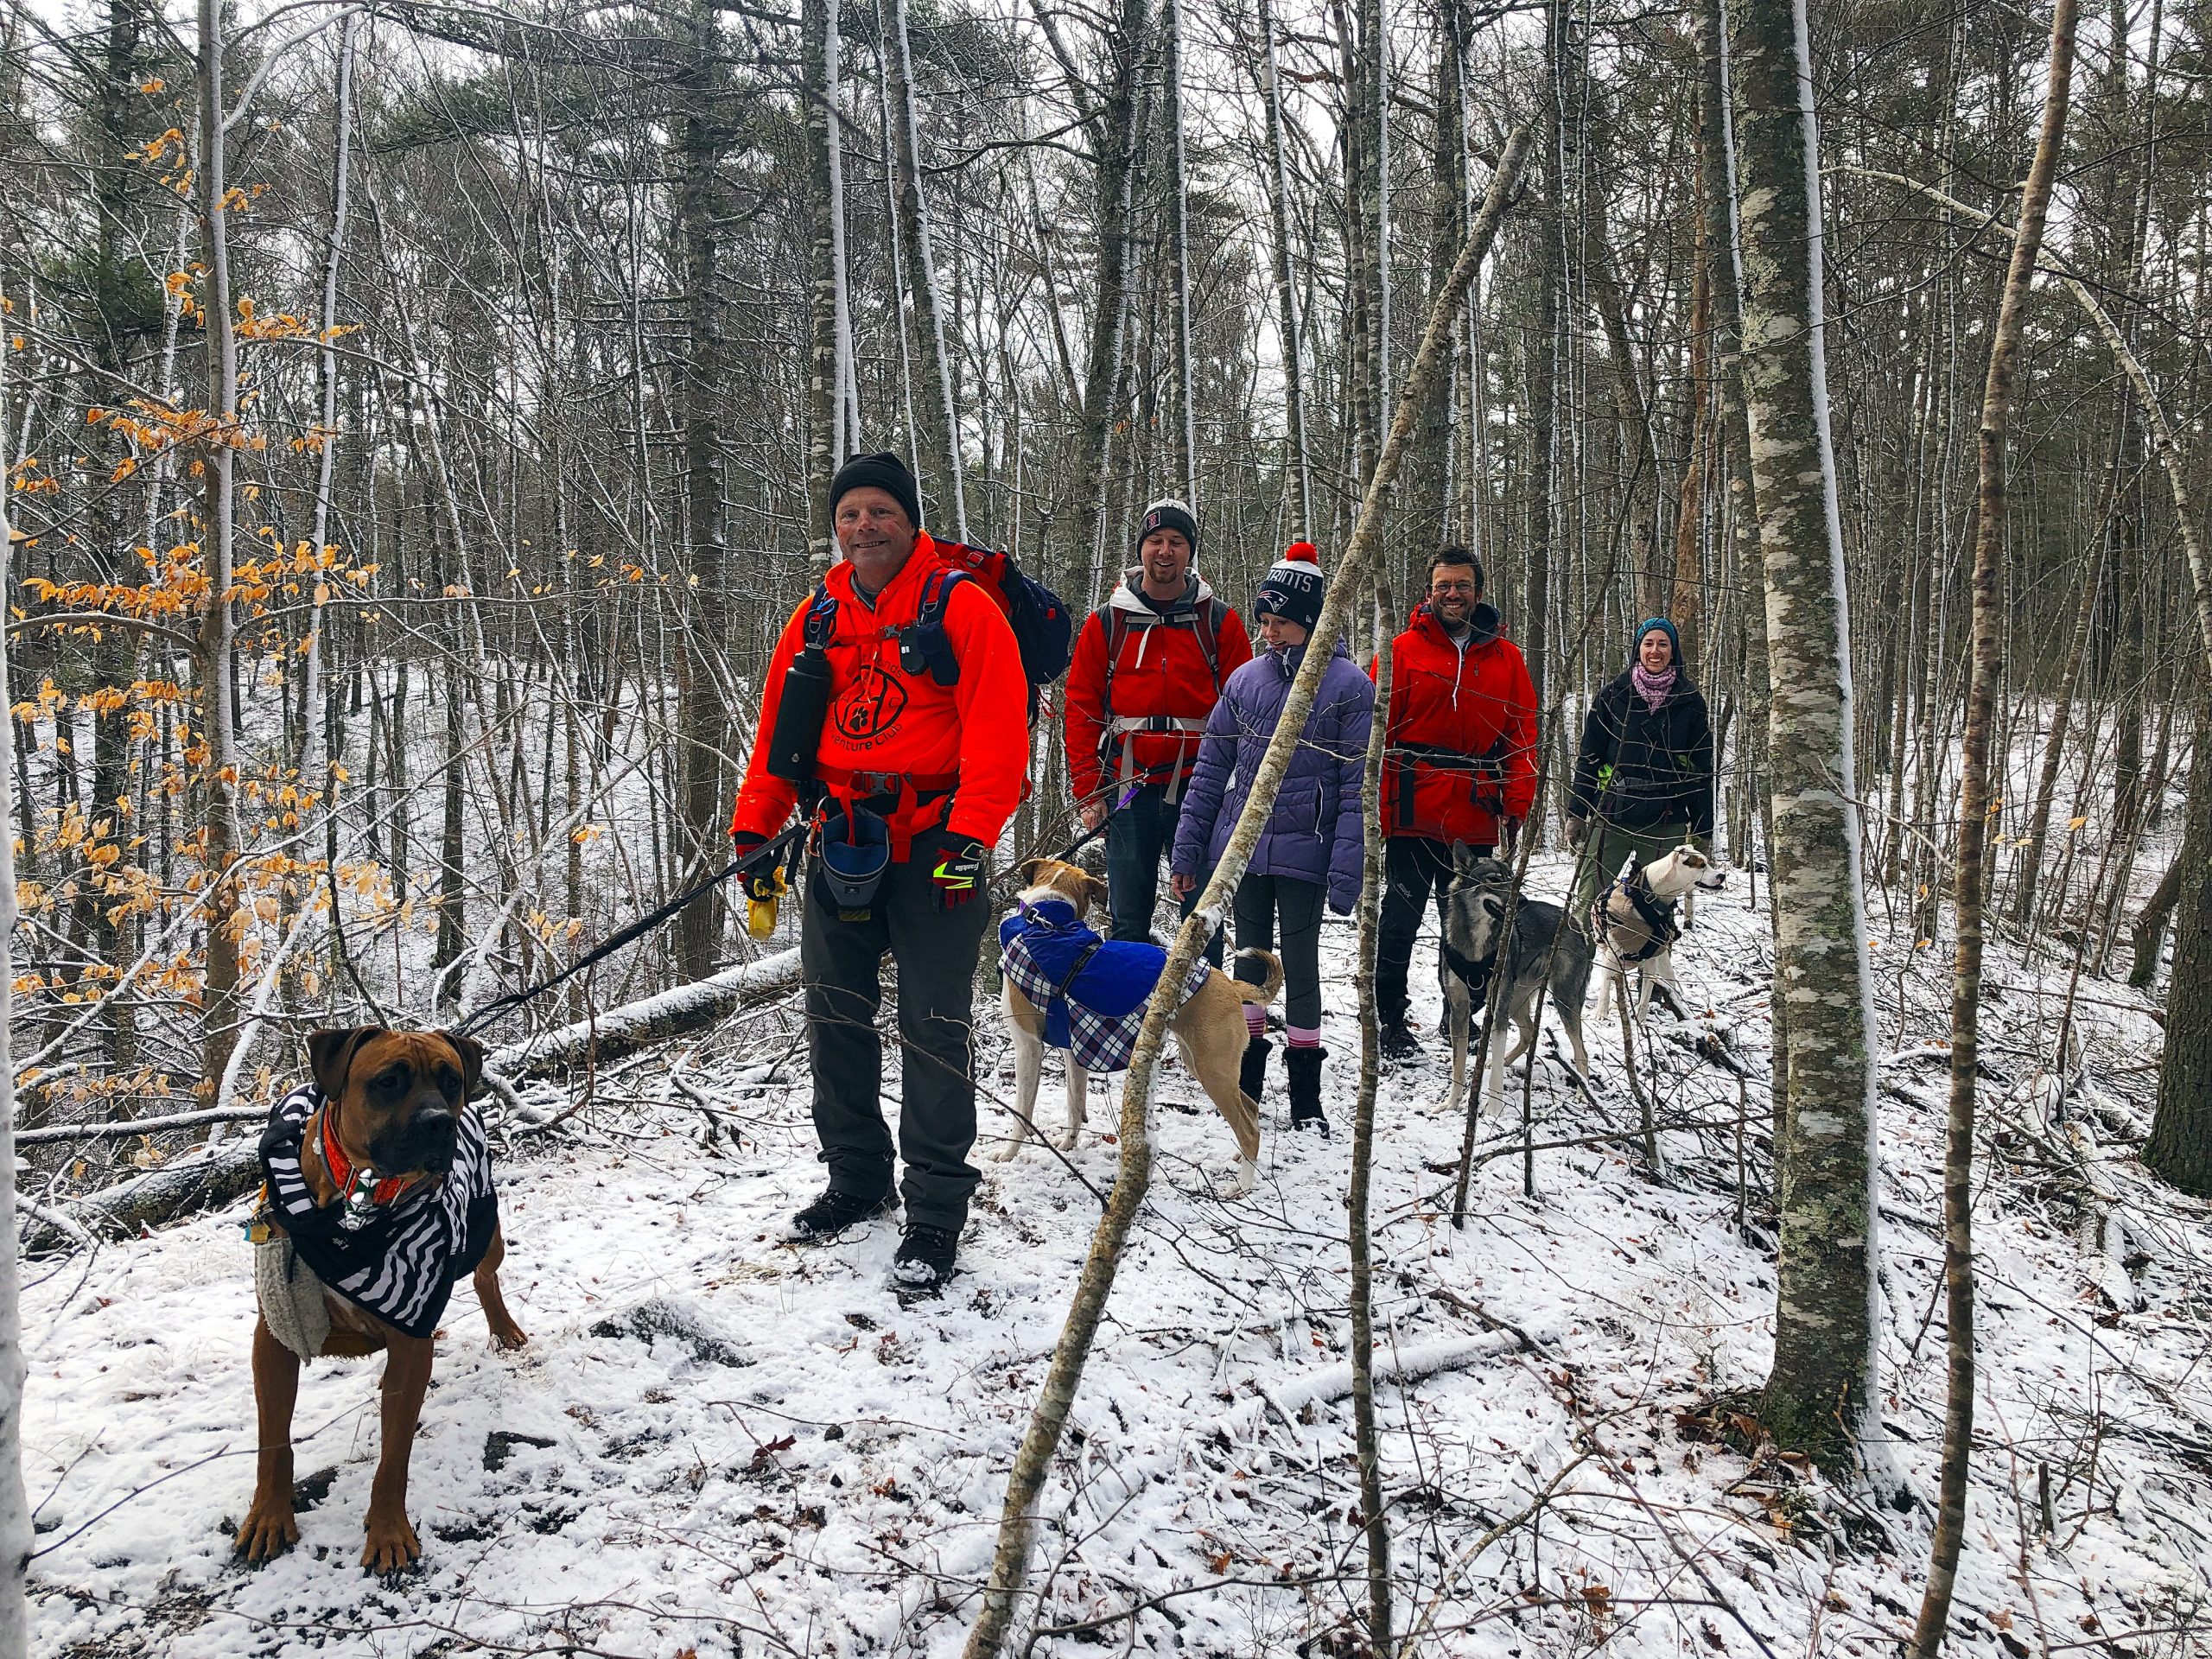 Dog training and dog hiking with Adventure Club in Dartmouth MA